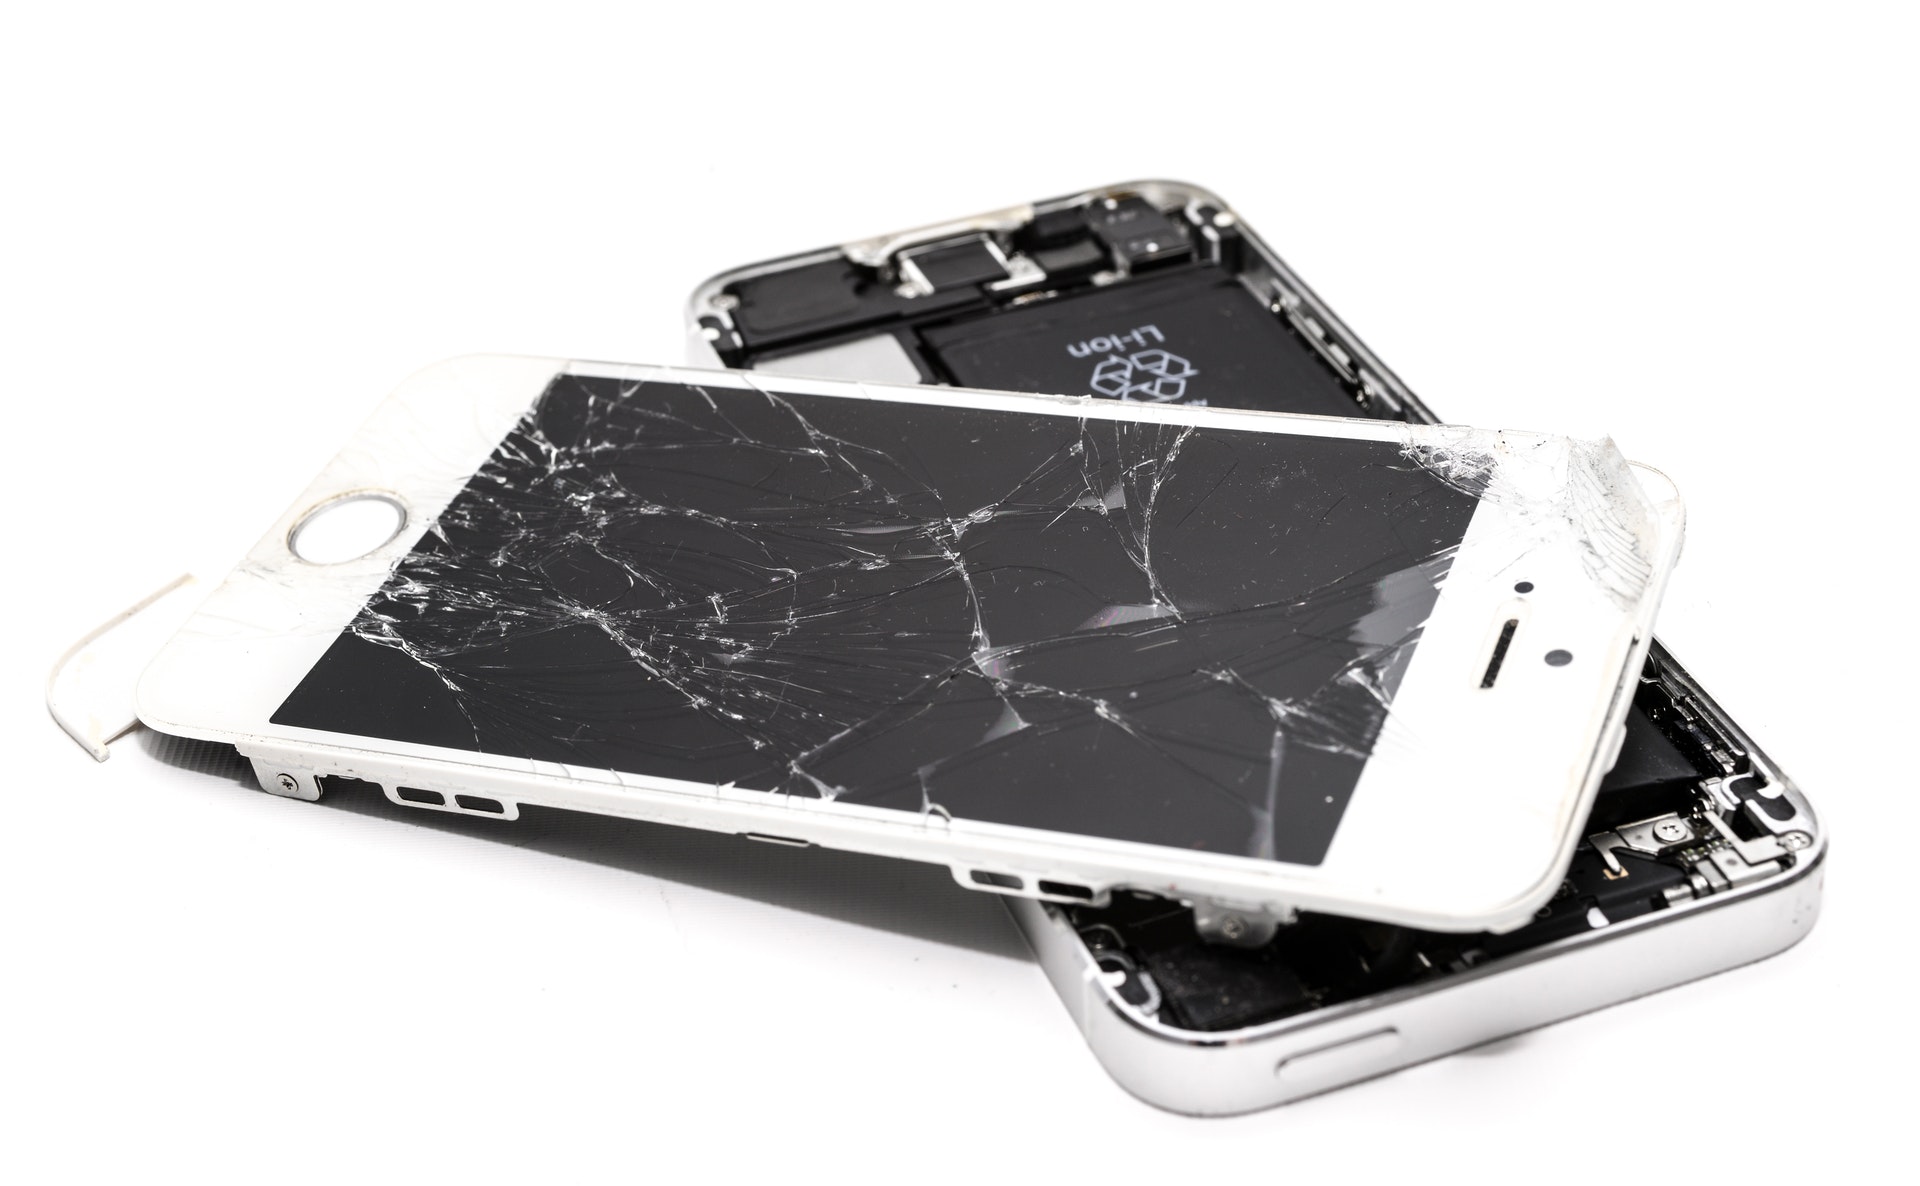 Repair Your Mobiles with Assurance